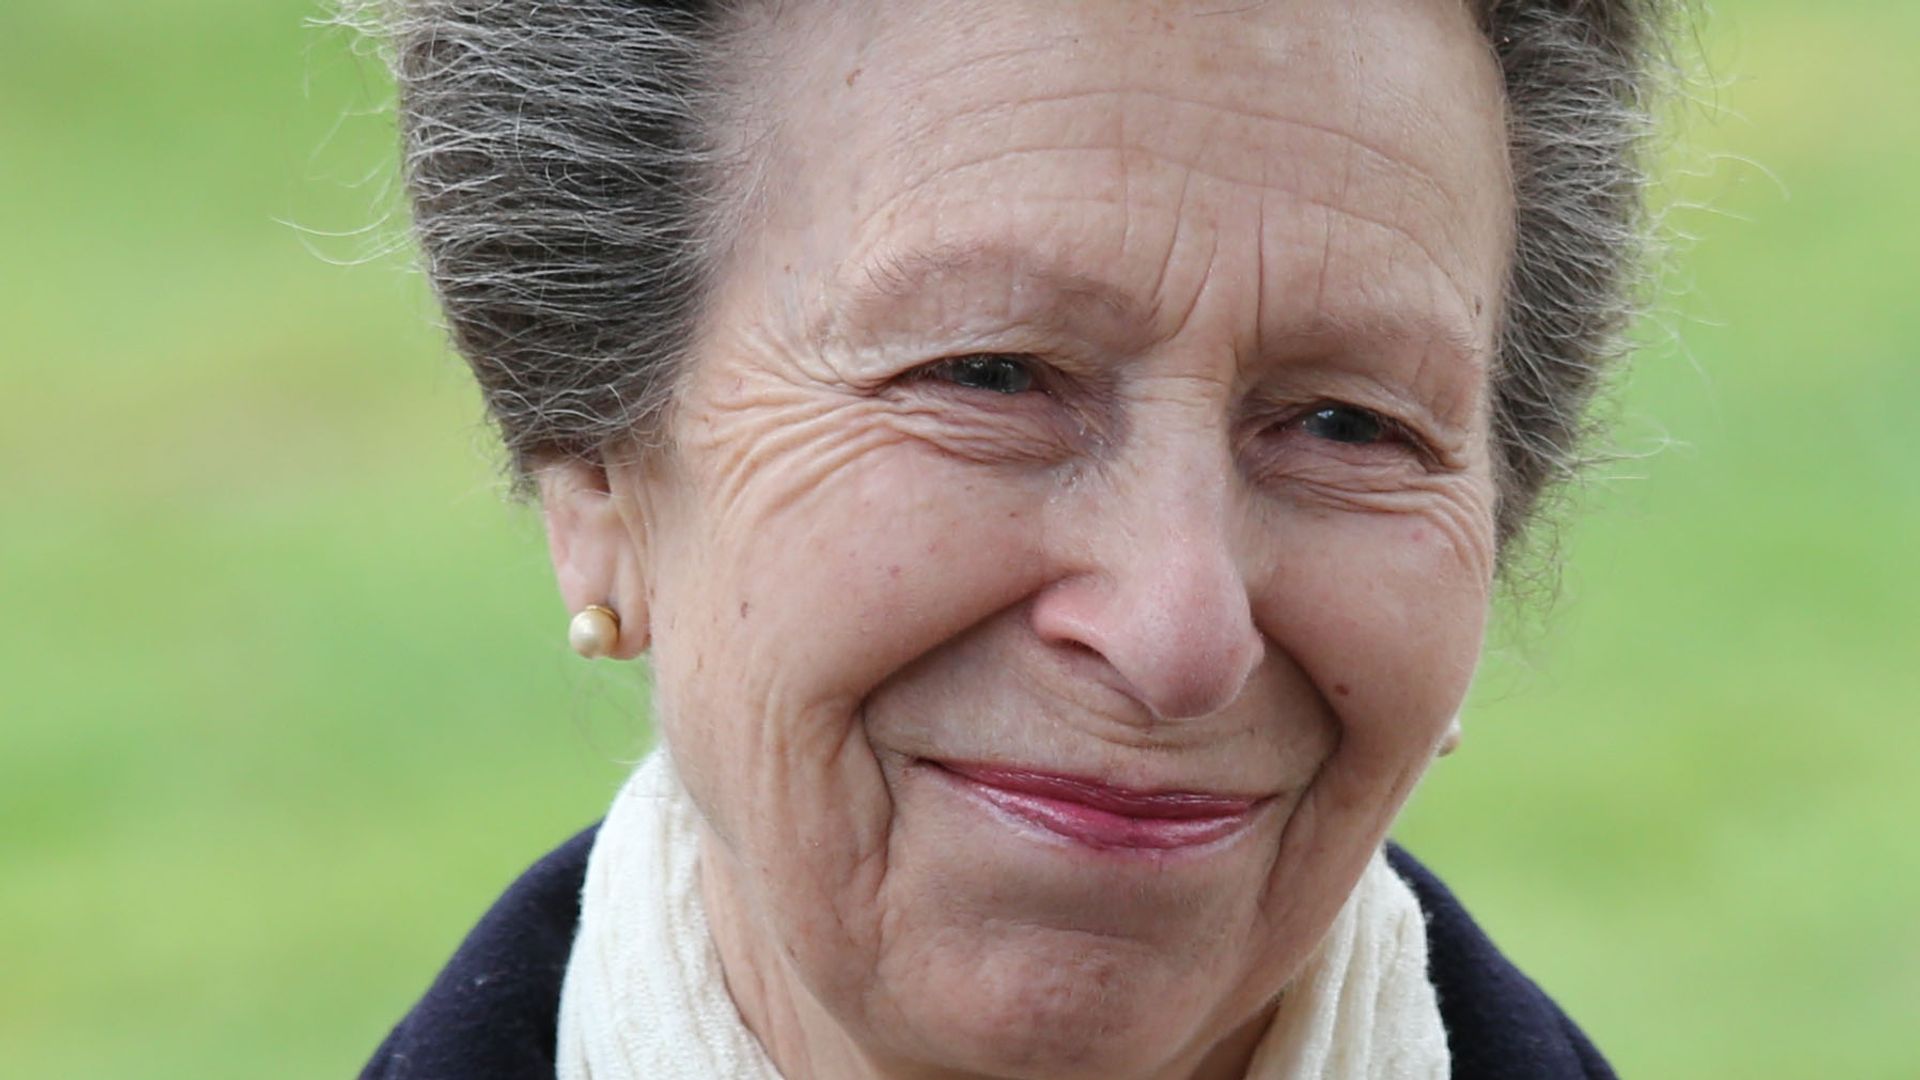 The Princess Royal in a white scarf smiling at King Charles' boarding school